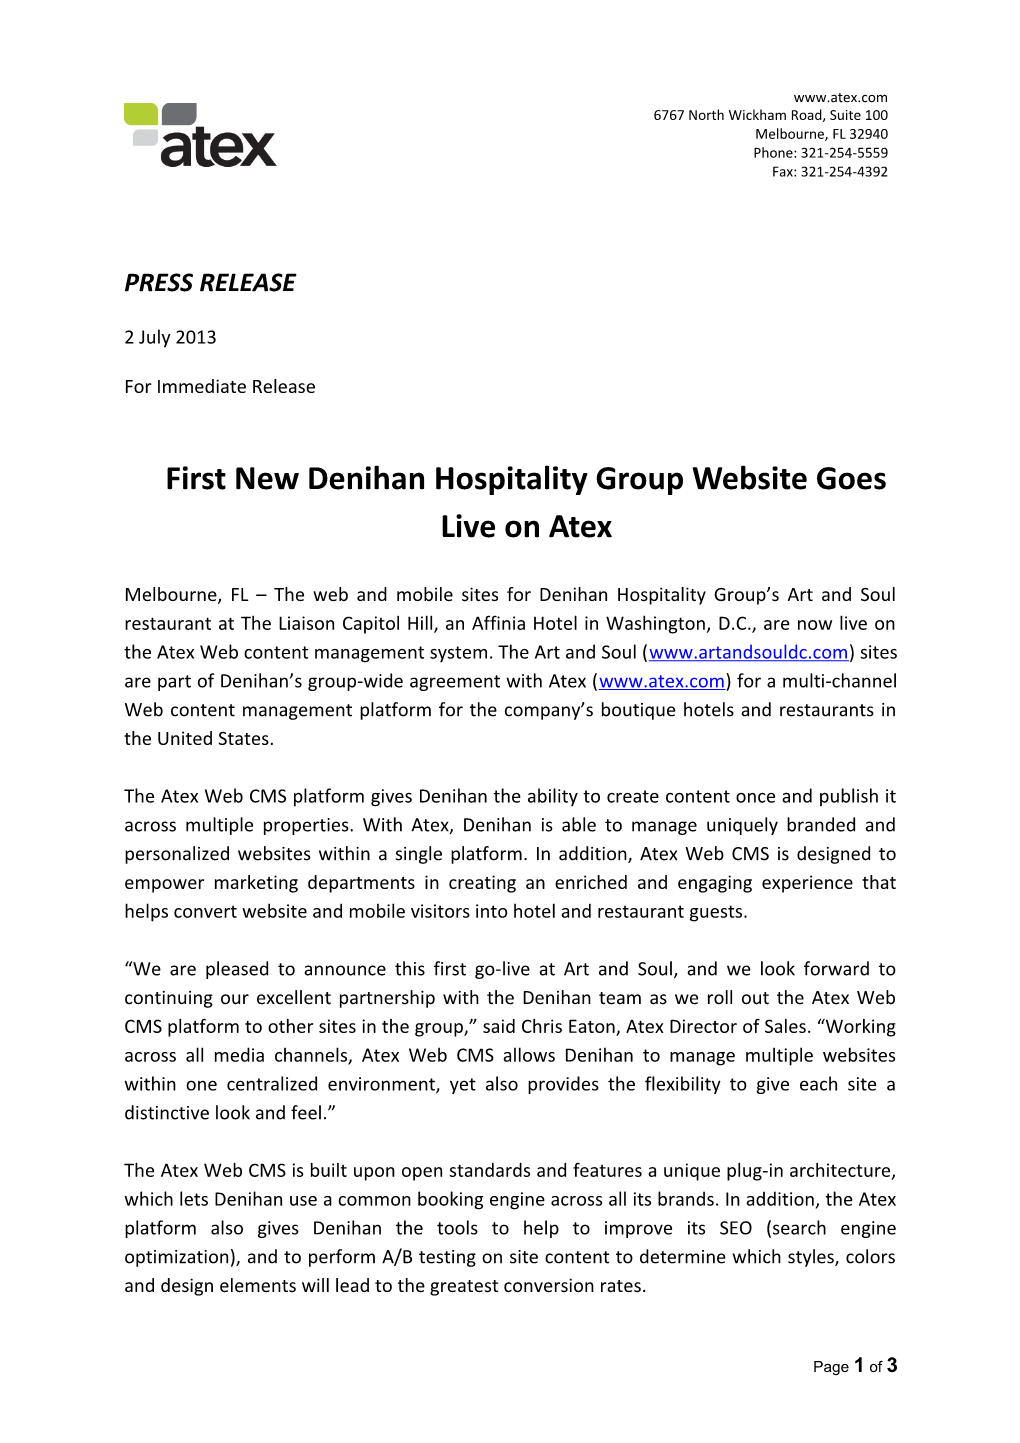 First New Denihan Hospitality Group Website Goes Live on Atex